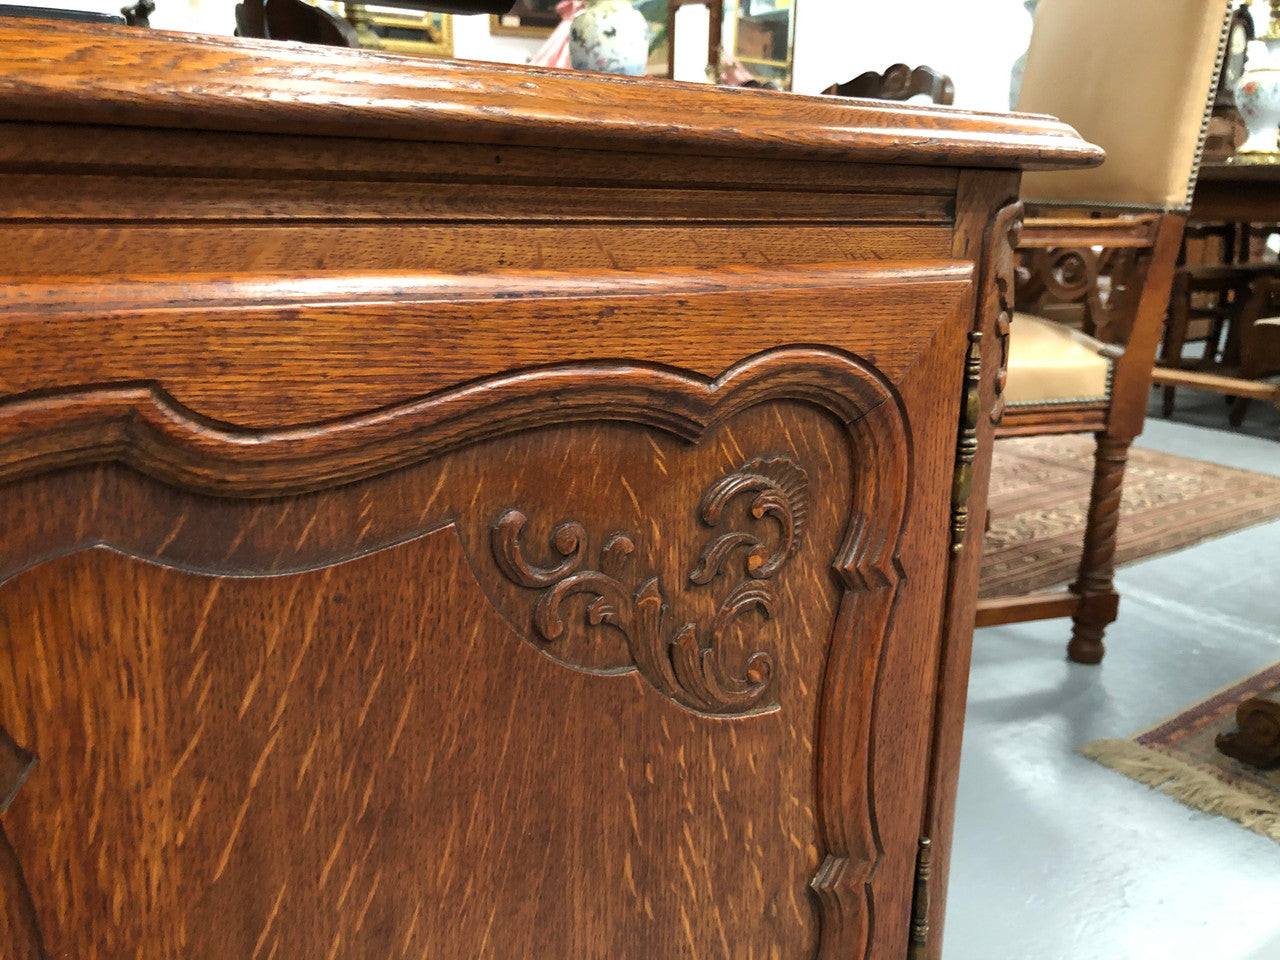 Beautifully carved French oak TV/Entertainment cabinet with great storage space. It has to lockable doors and is in very good original condition.